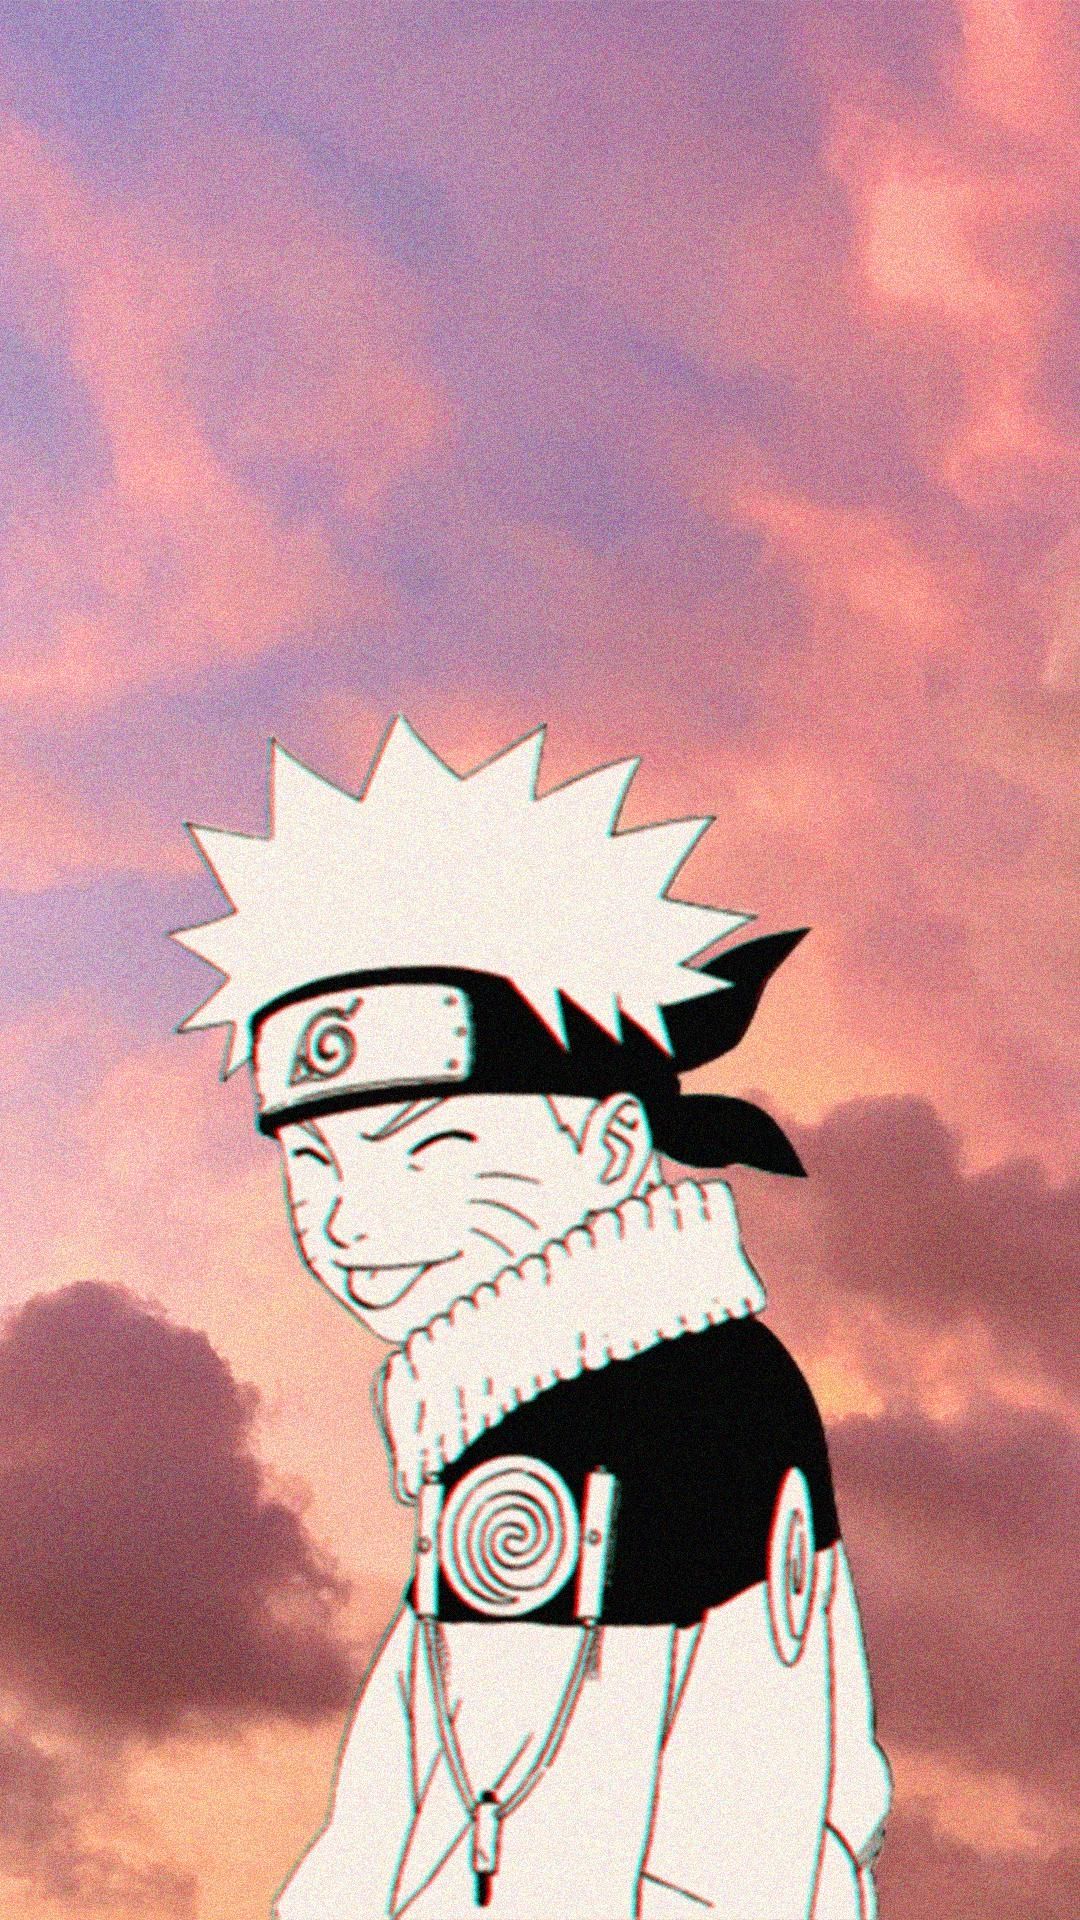 Anime Wallpapers Aesthetic Naruto / Pain Nagato wallpaper by PAiNnoob